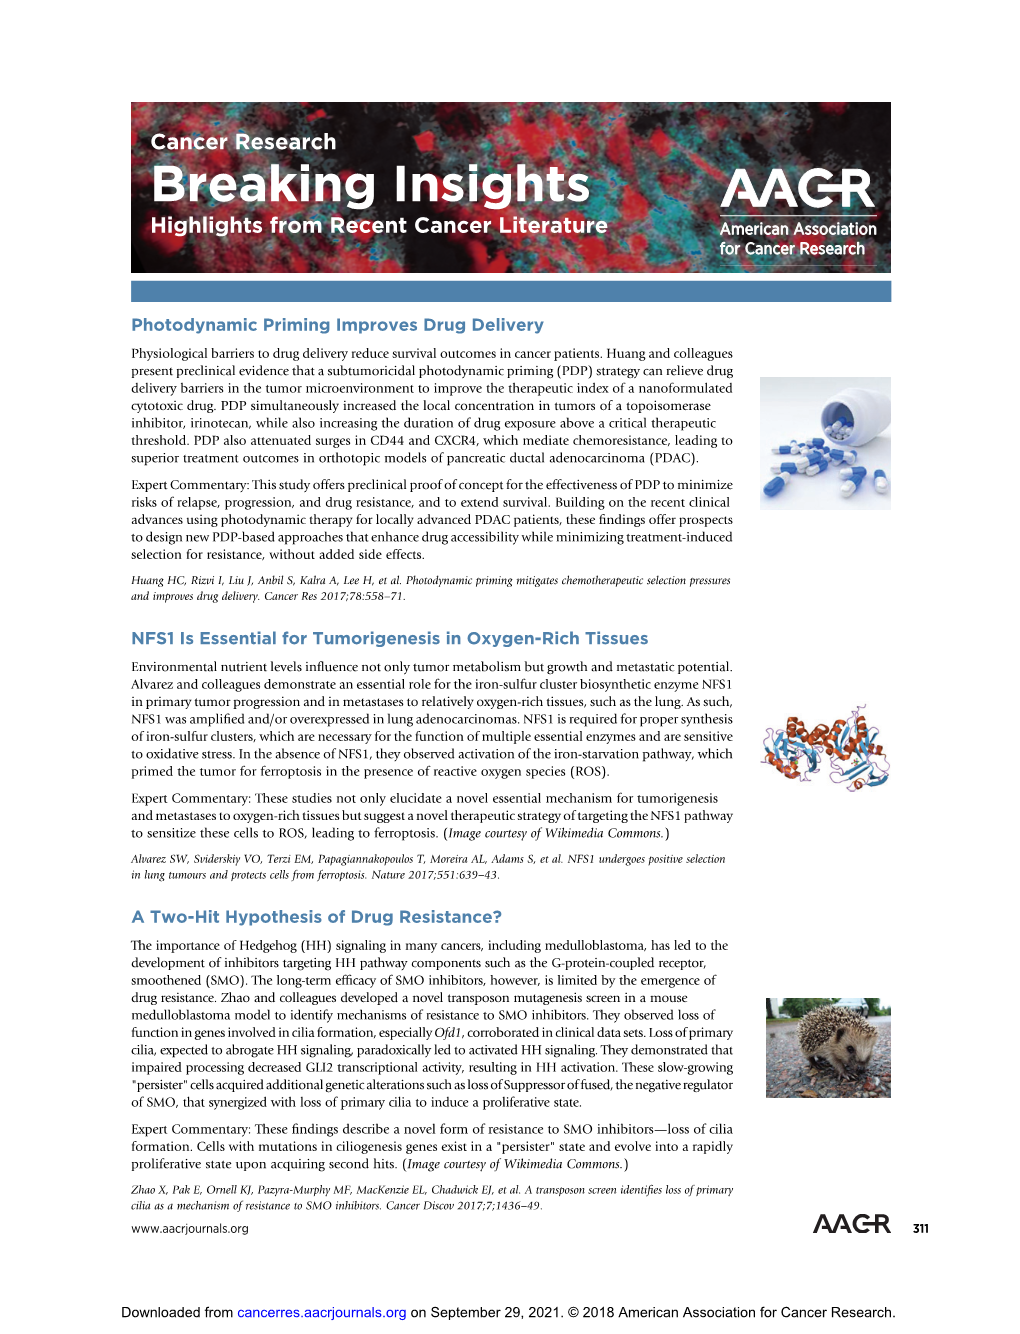 Breaking Insights Highlights from Recent Cancer Literature